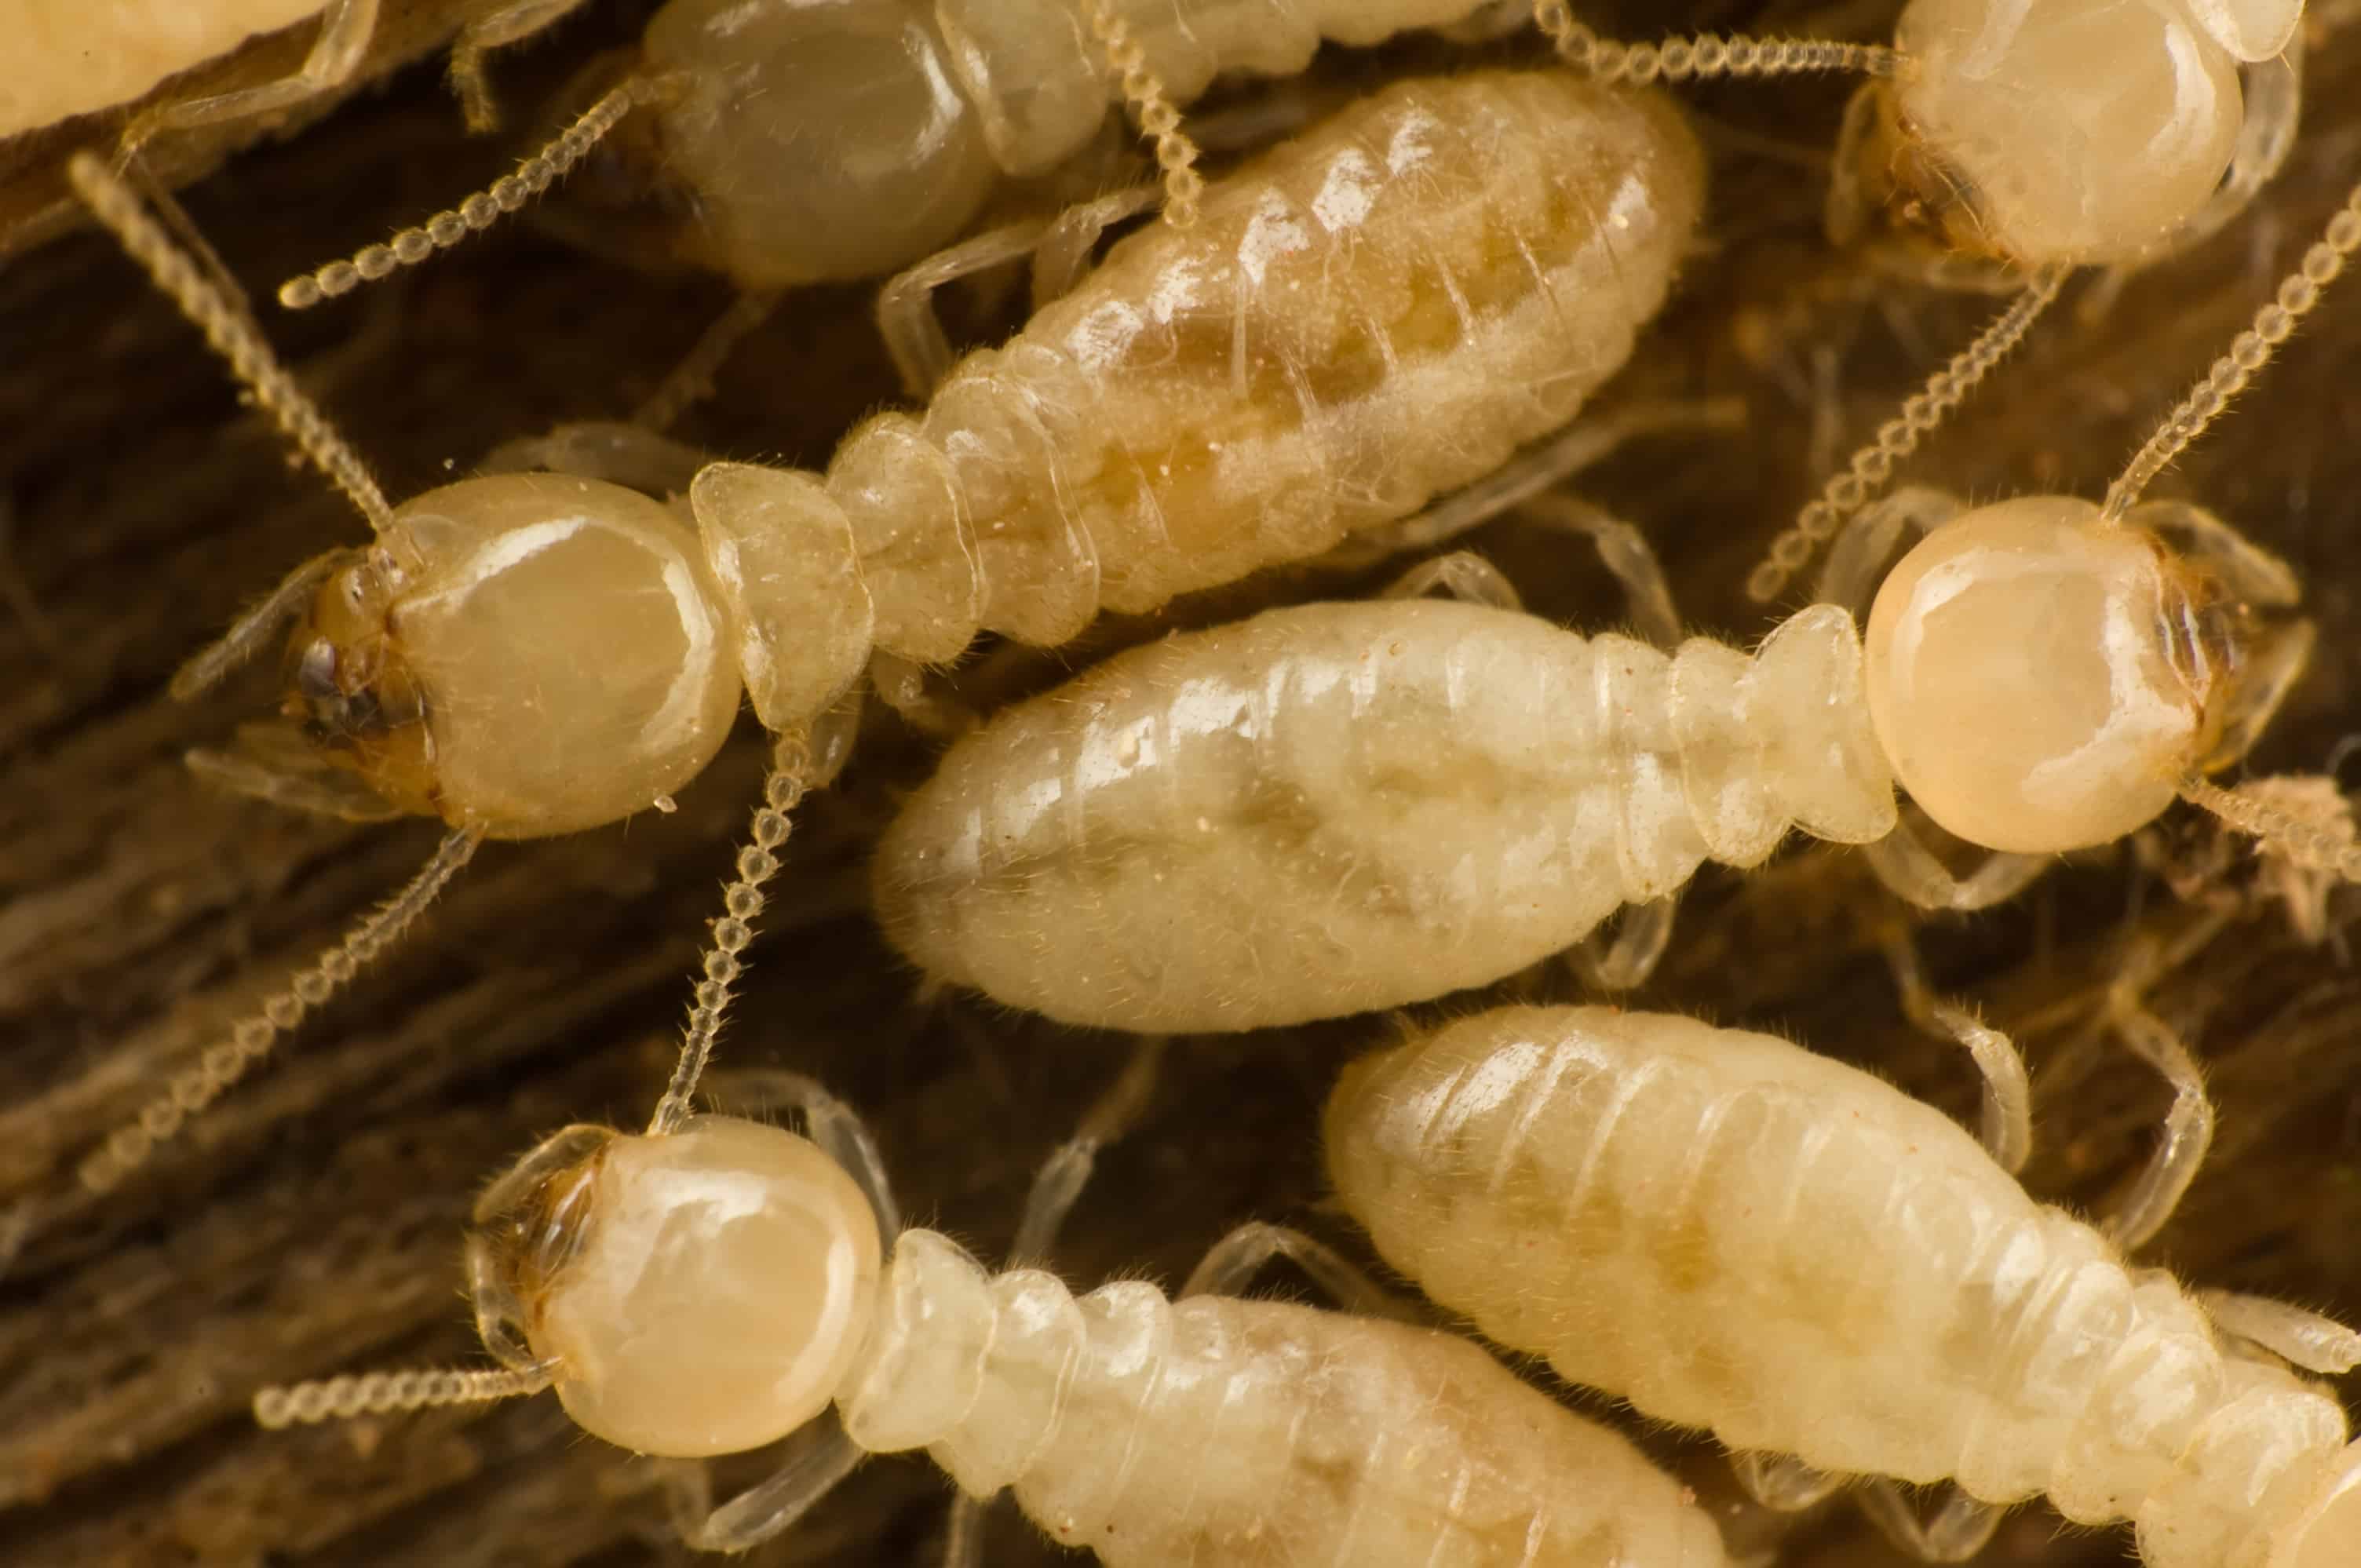 Subterranean Termite | How Much Damage They Can Do